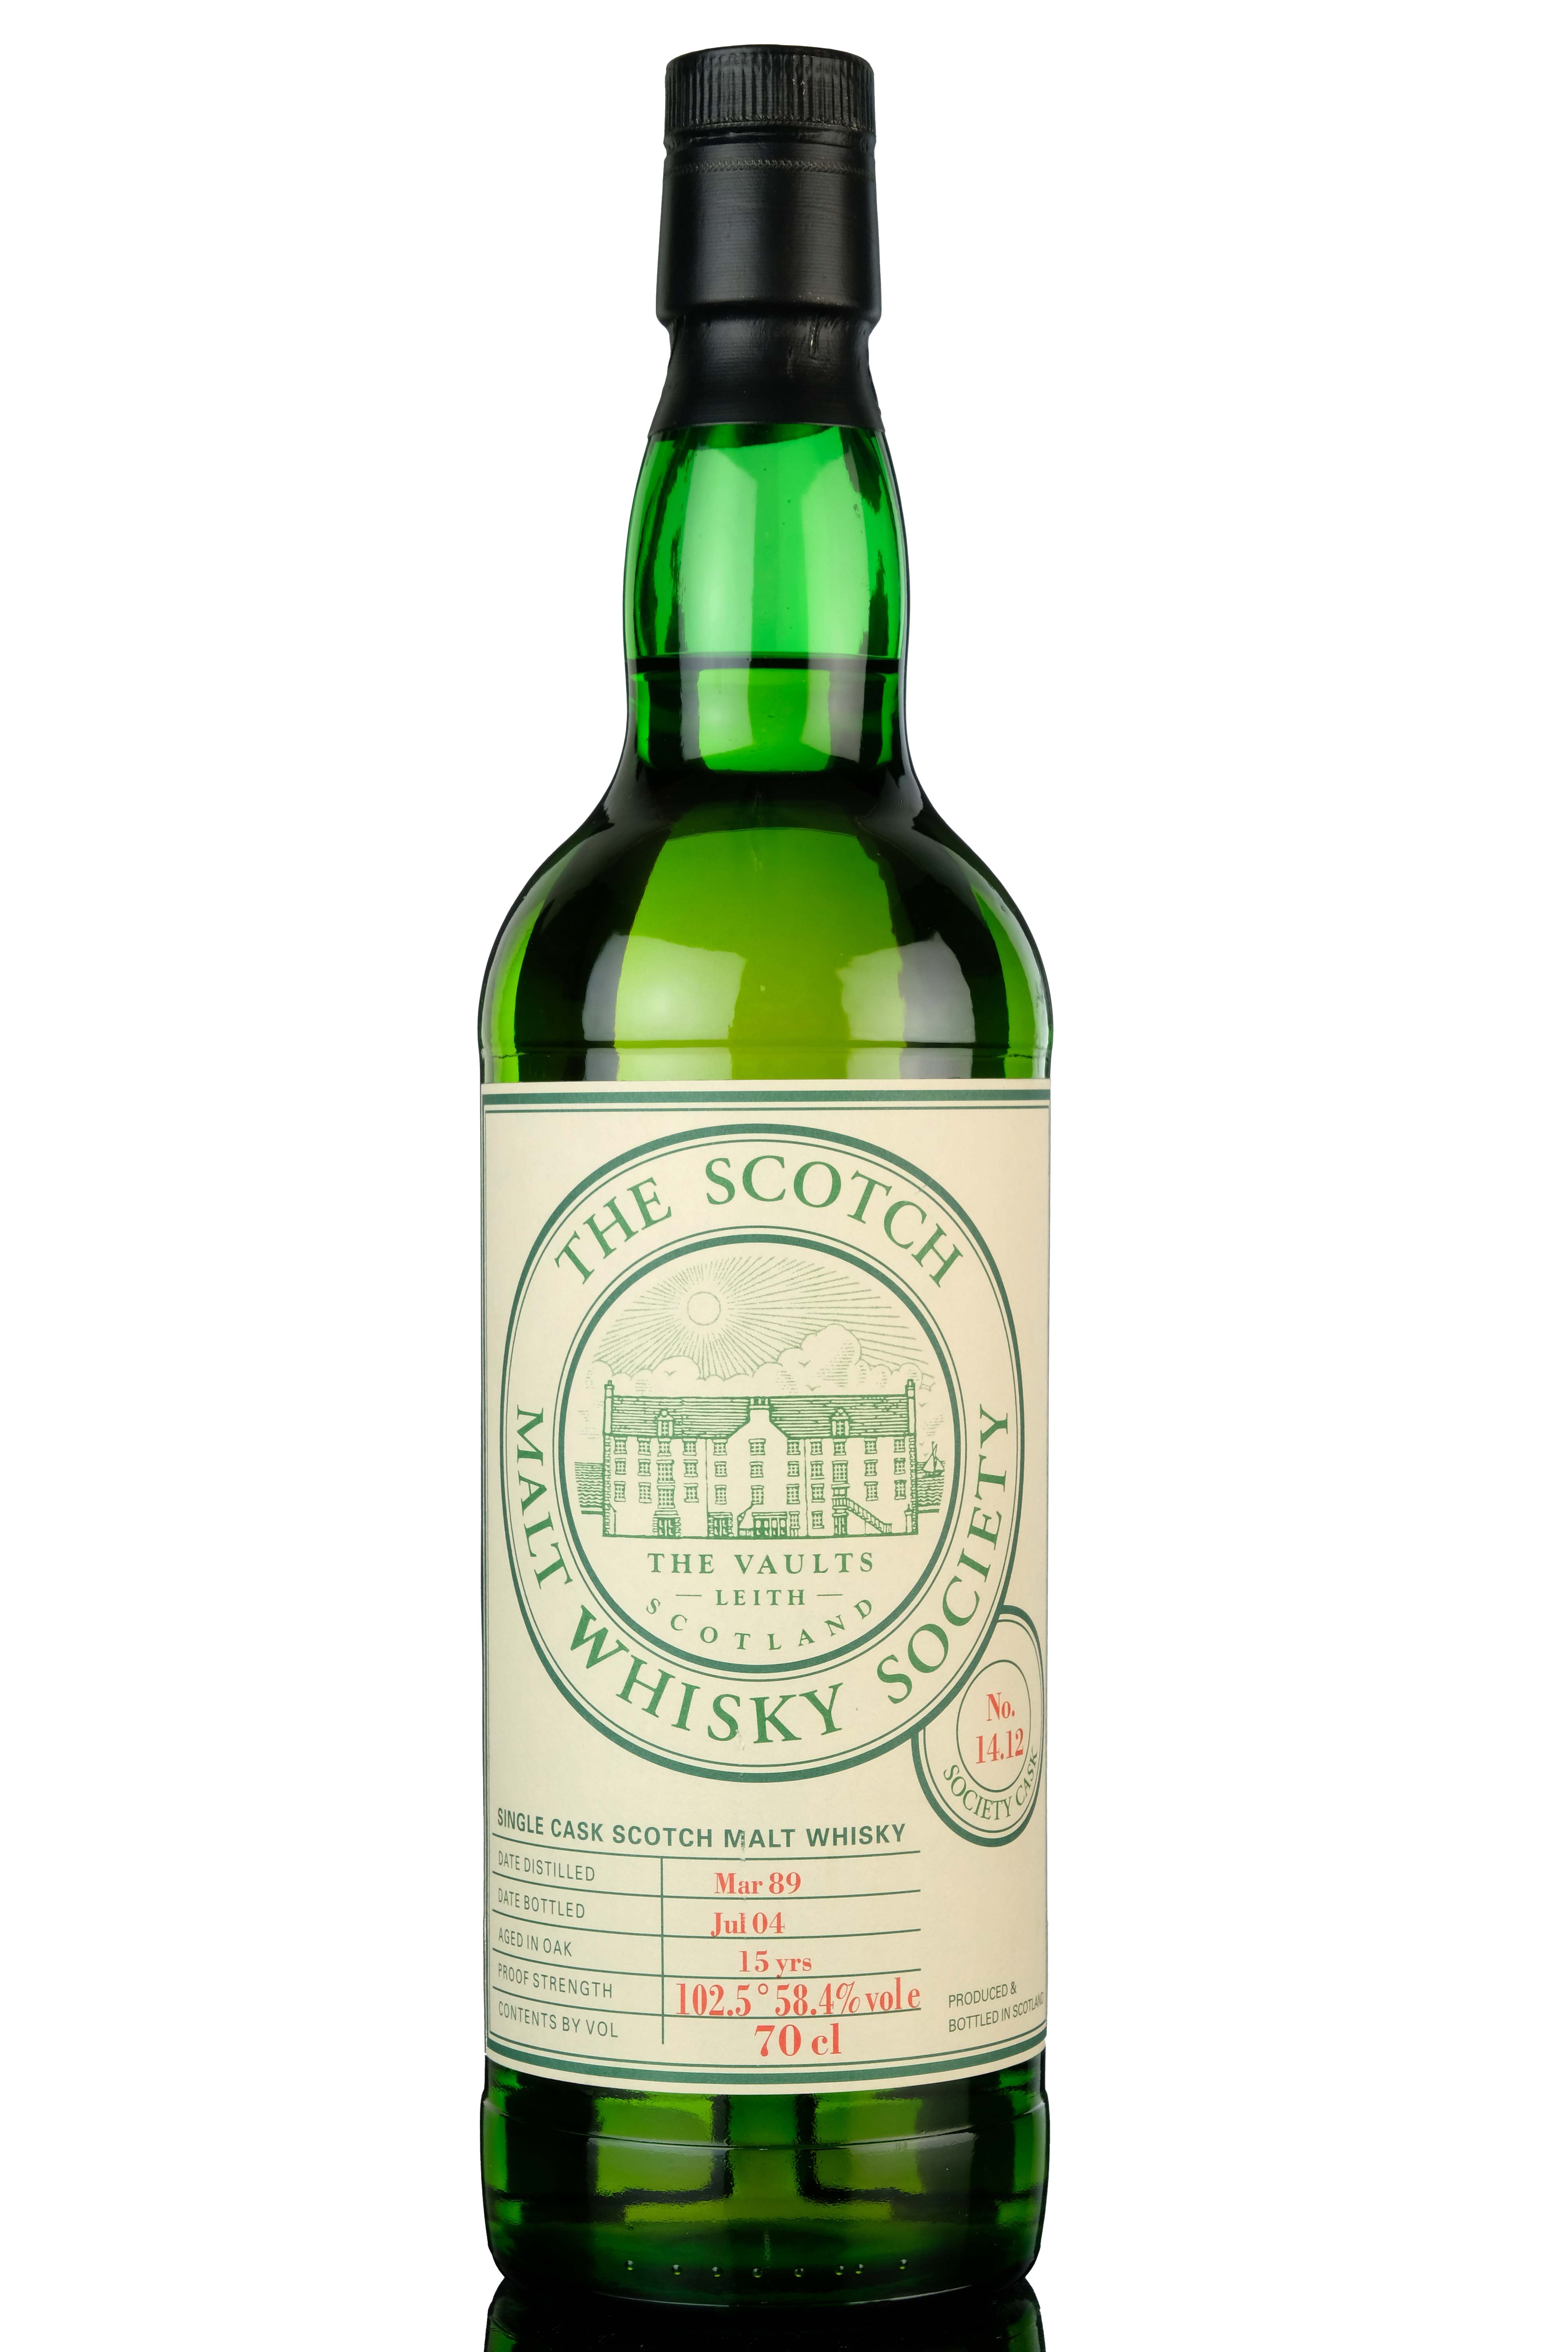 Talisker 1989-2004 - 15 Year Old - SMWS 14.12